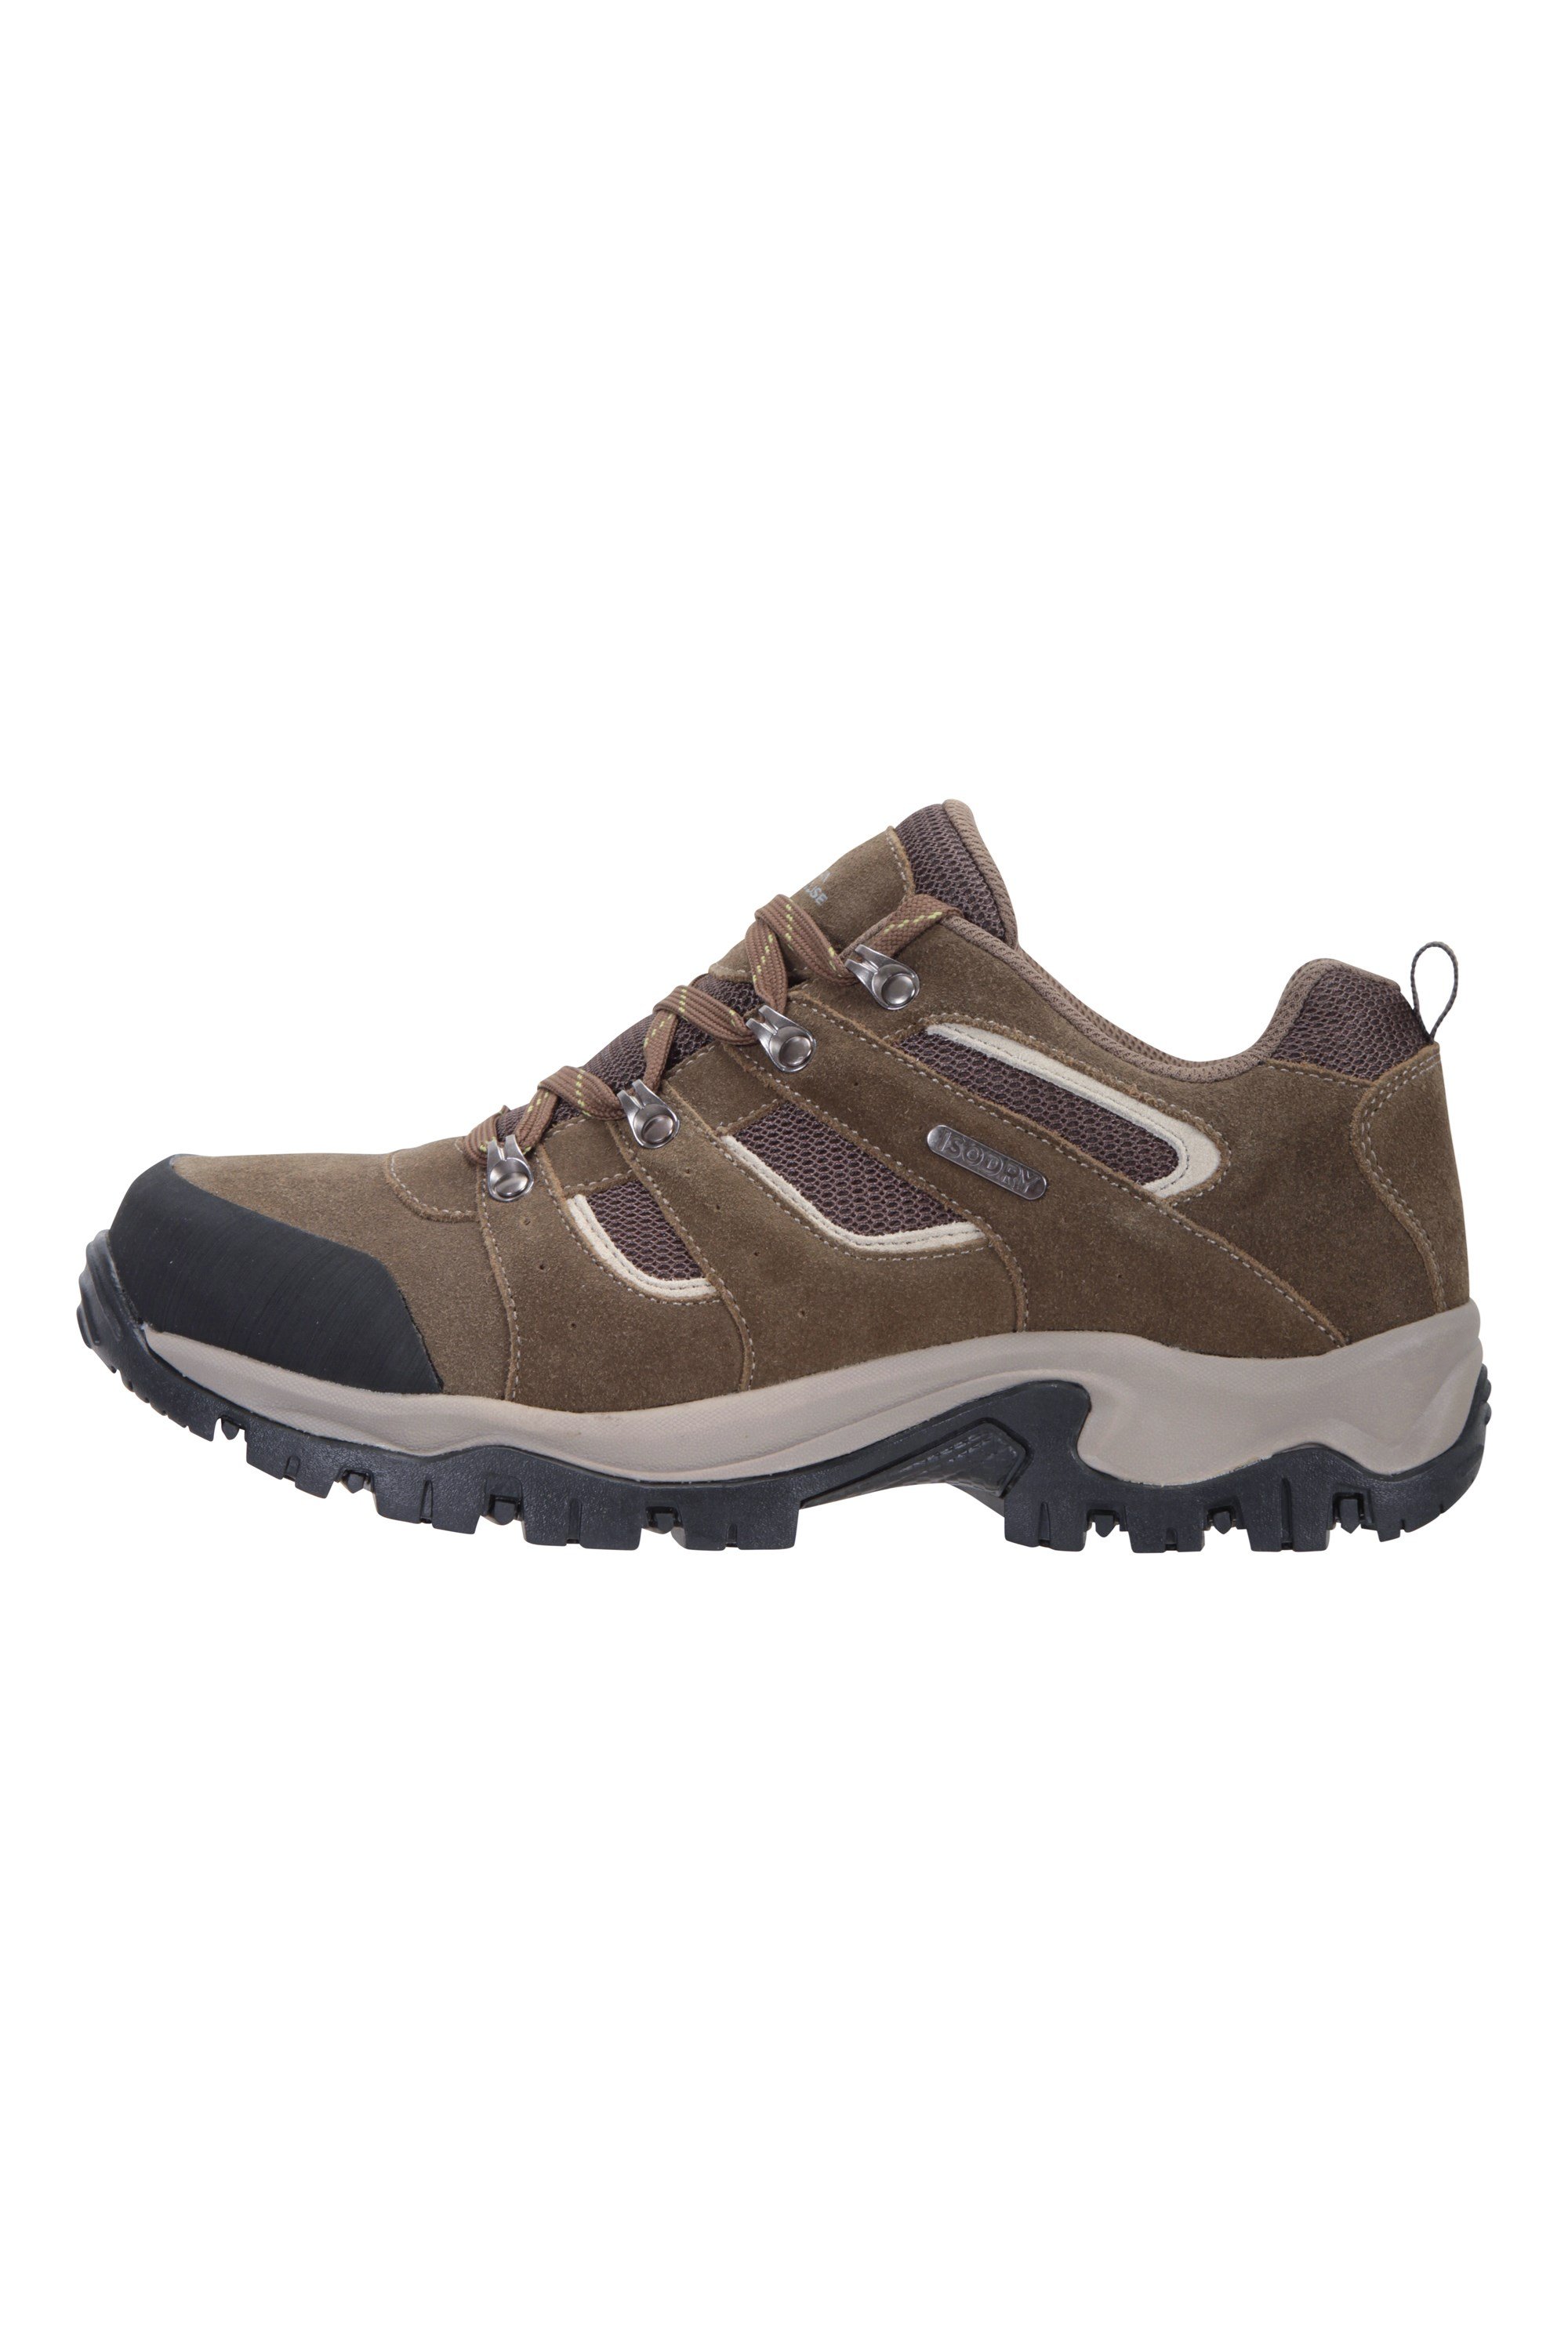 Mountain Warehouse Hommes Distance Trainer 